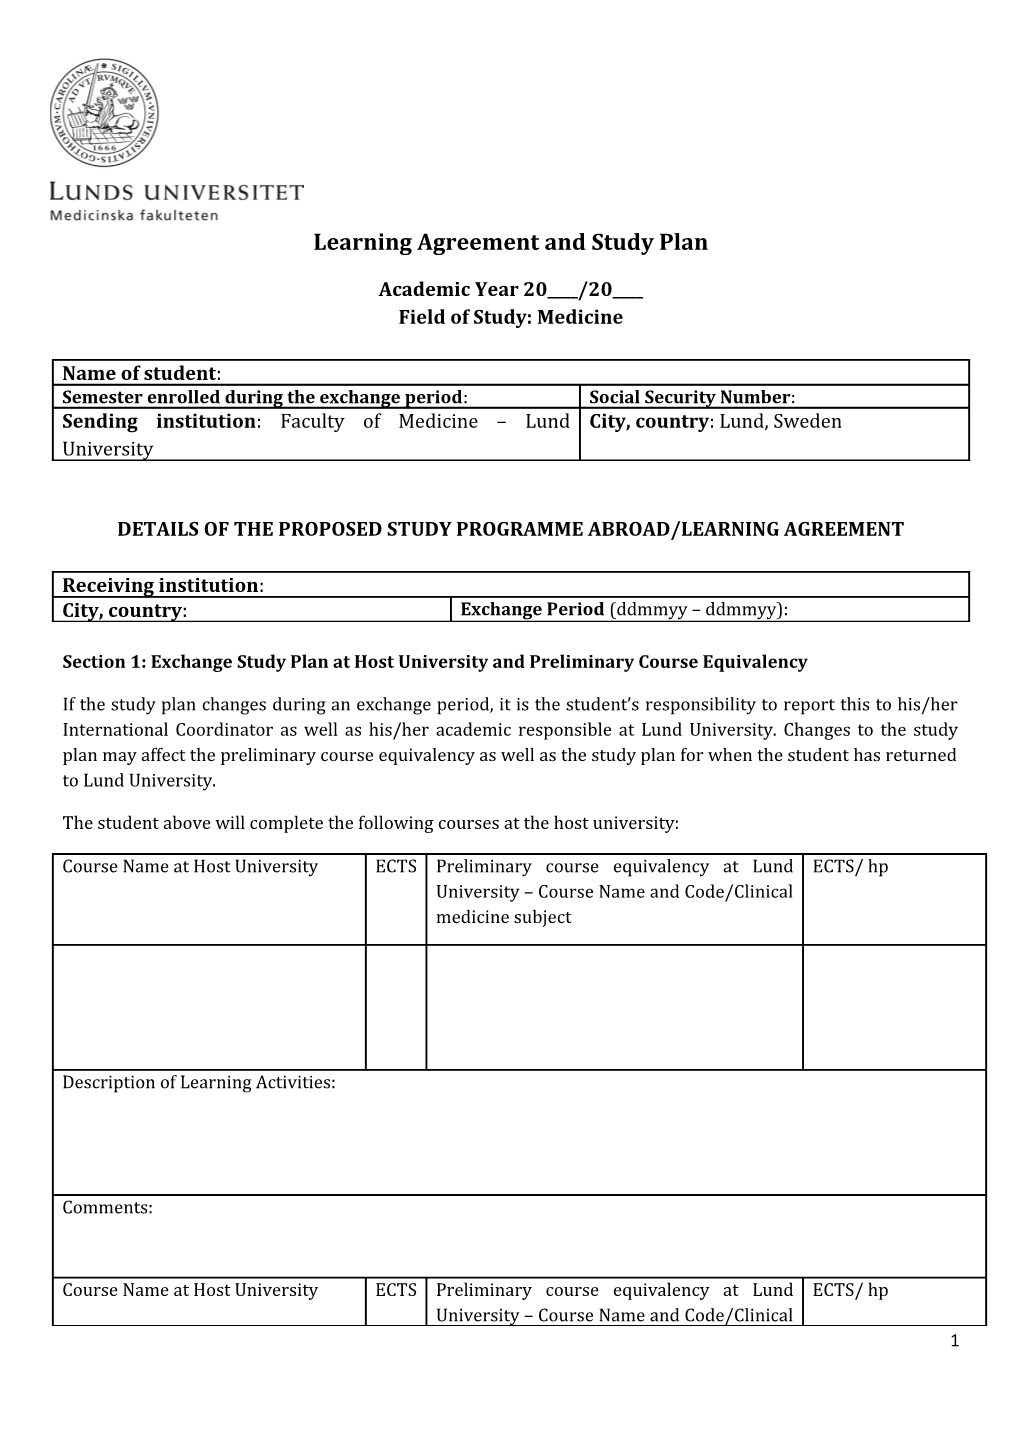 Learning Agreement and Study Plan